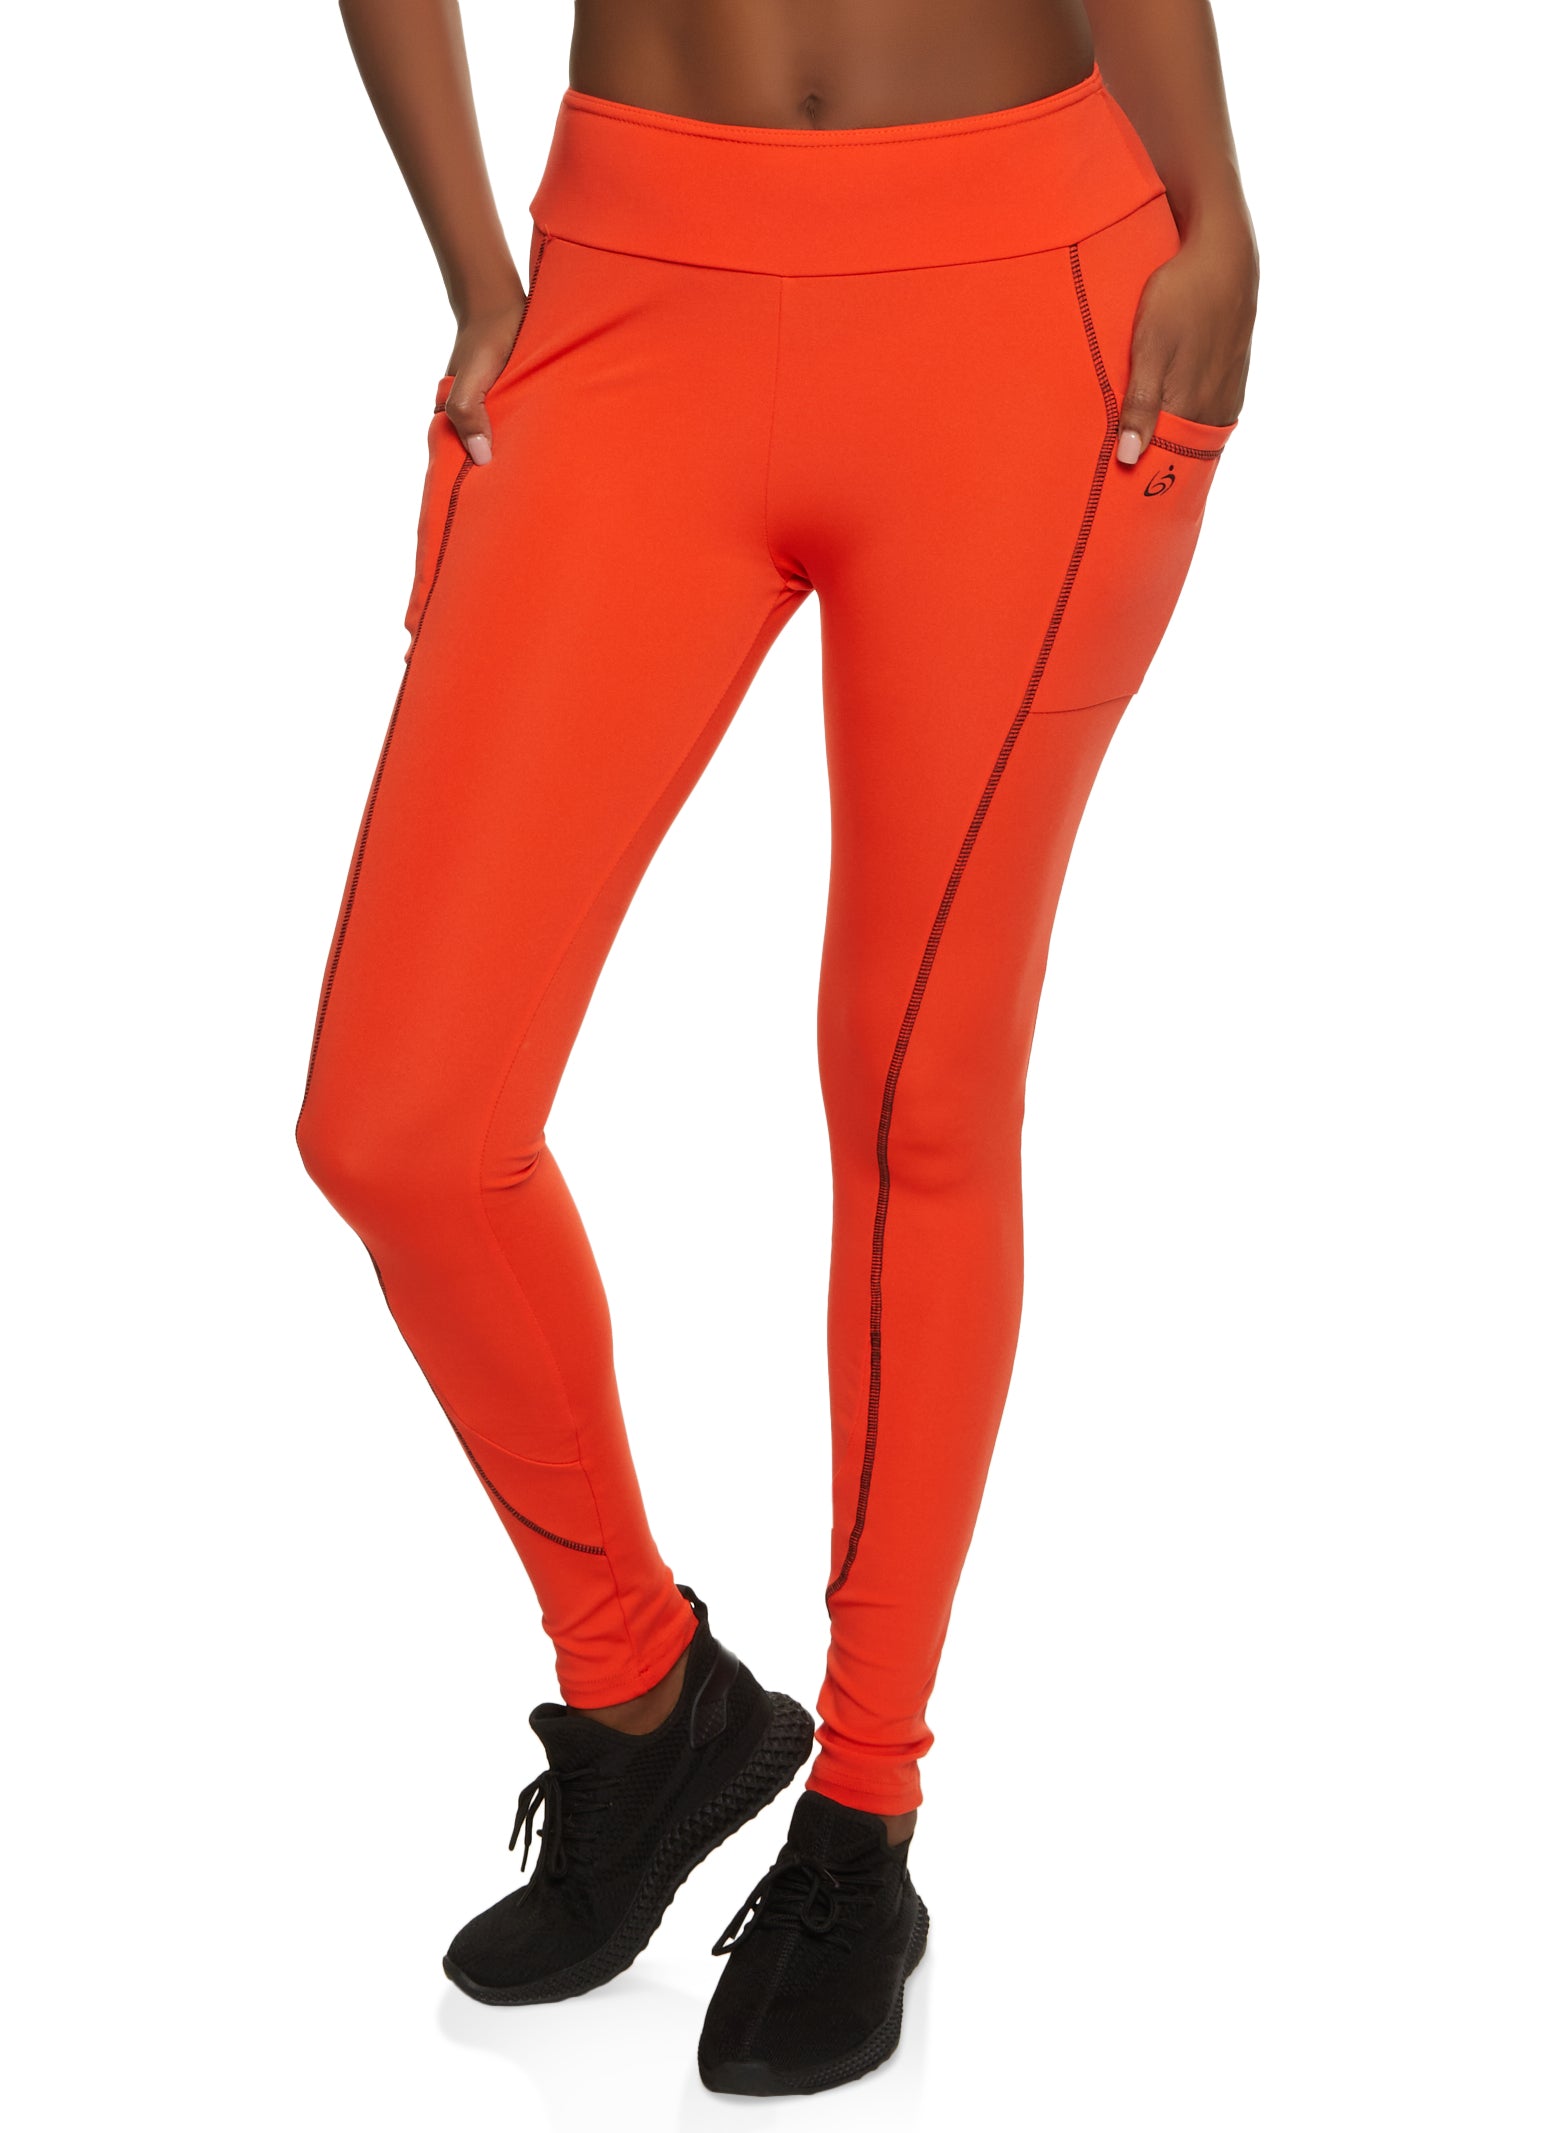 Womens Leggings and Jeggings, Everyday Low Prices